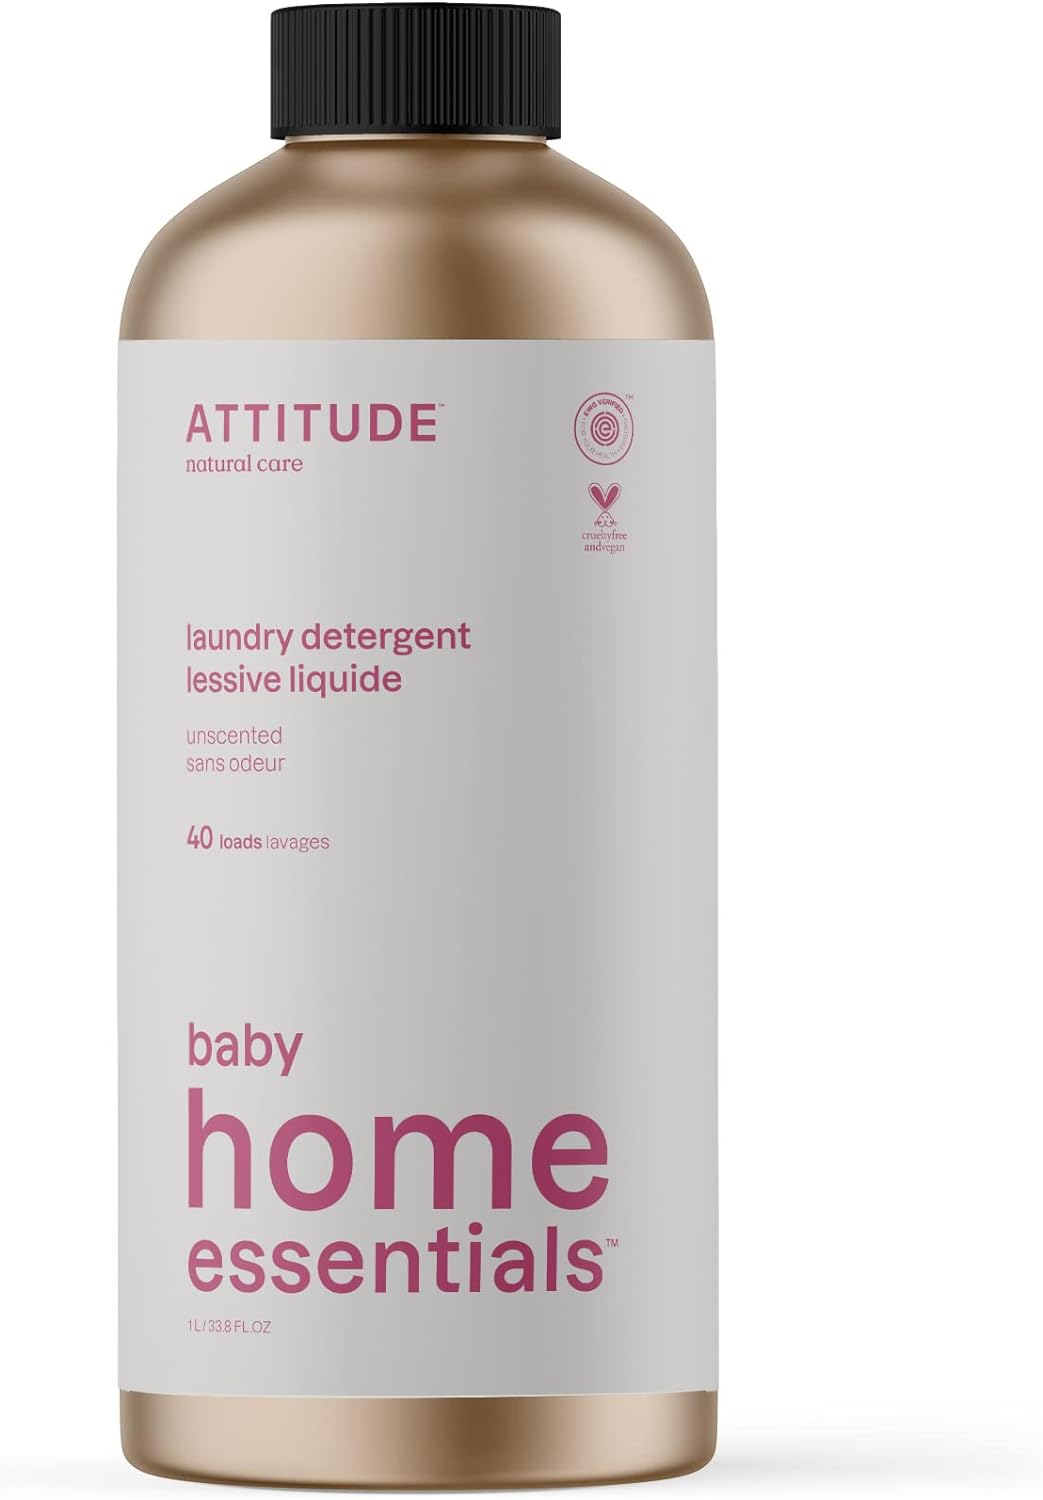 ATTITUDE Baby Laundry Detergent Liquid, EWG Verified, Safe for Baby Clothes, Infant, Newborn, Vegan, Naturally Derived Washing Soap, HE Compatible, Refillable Bottle, 40 Loads, Unscented, 33.8 Fl Oz